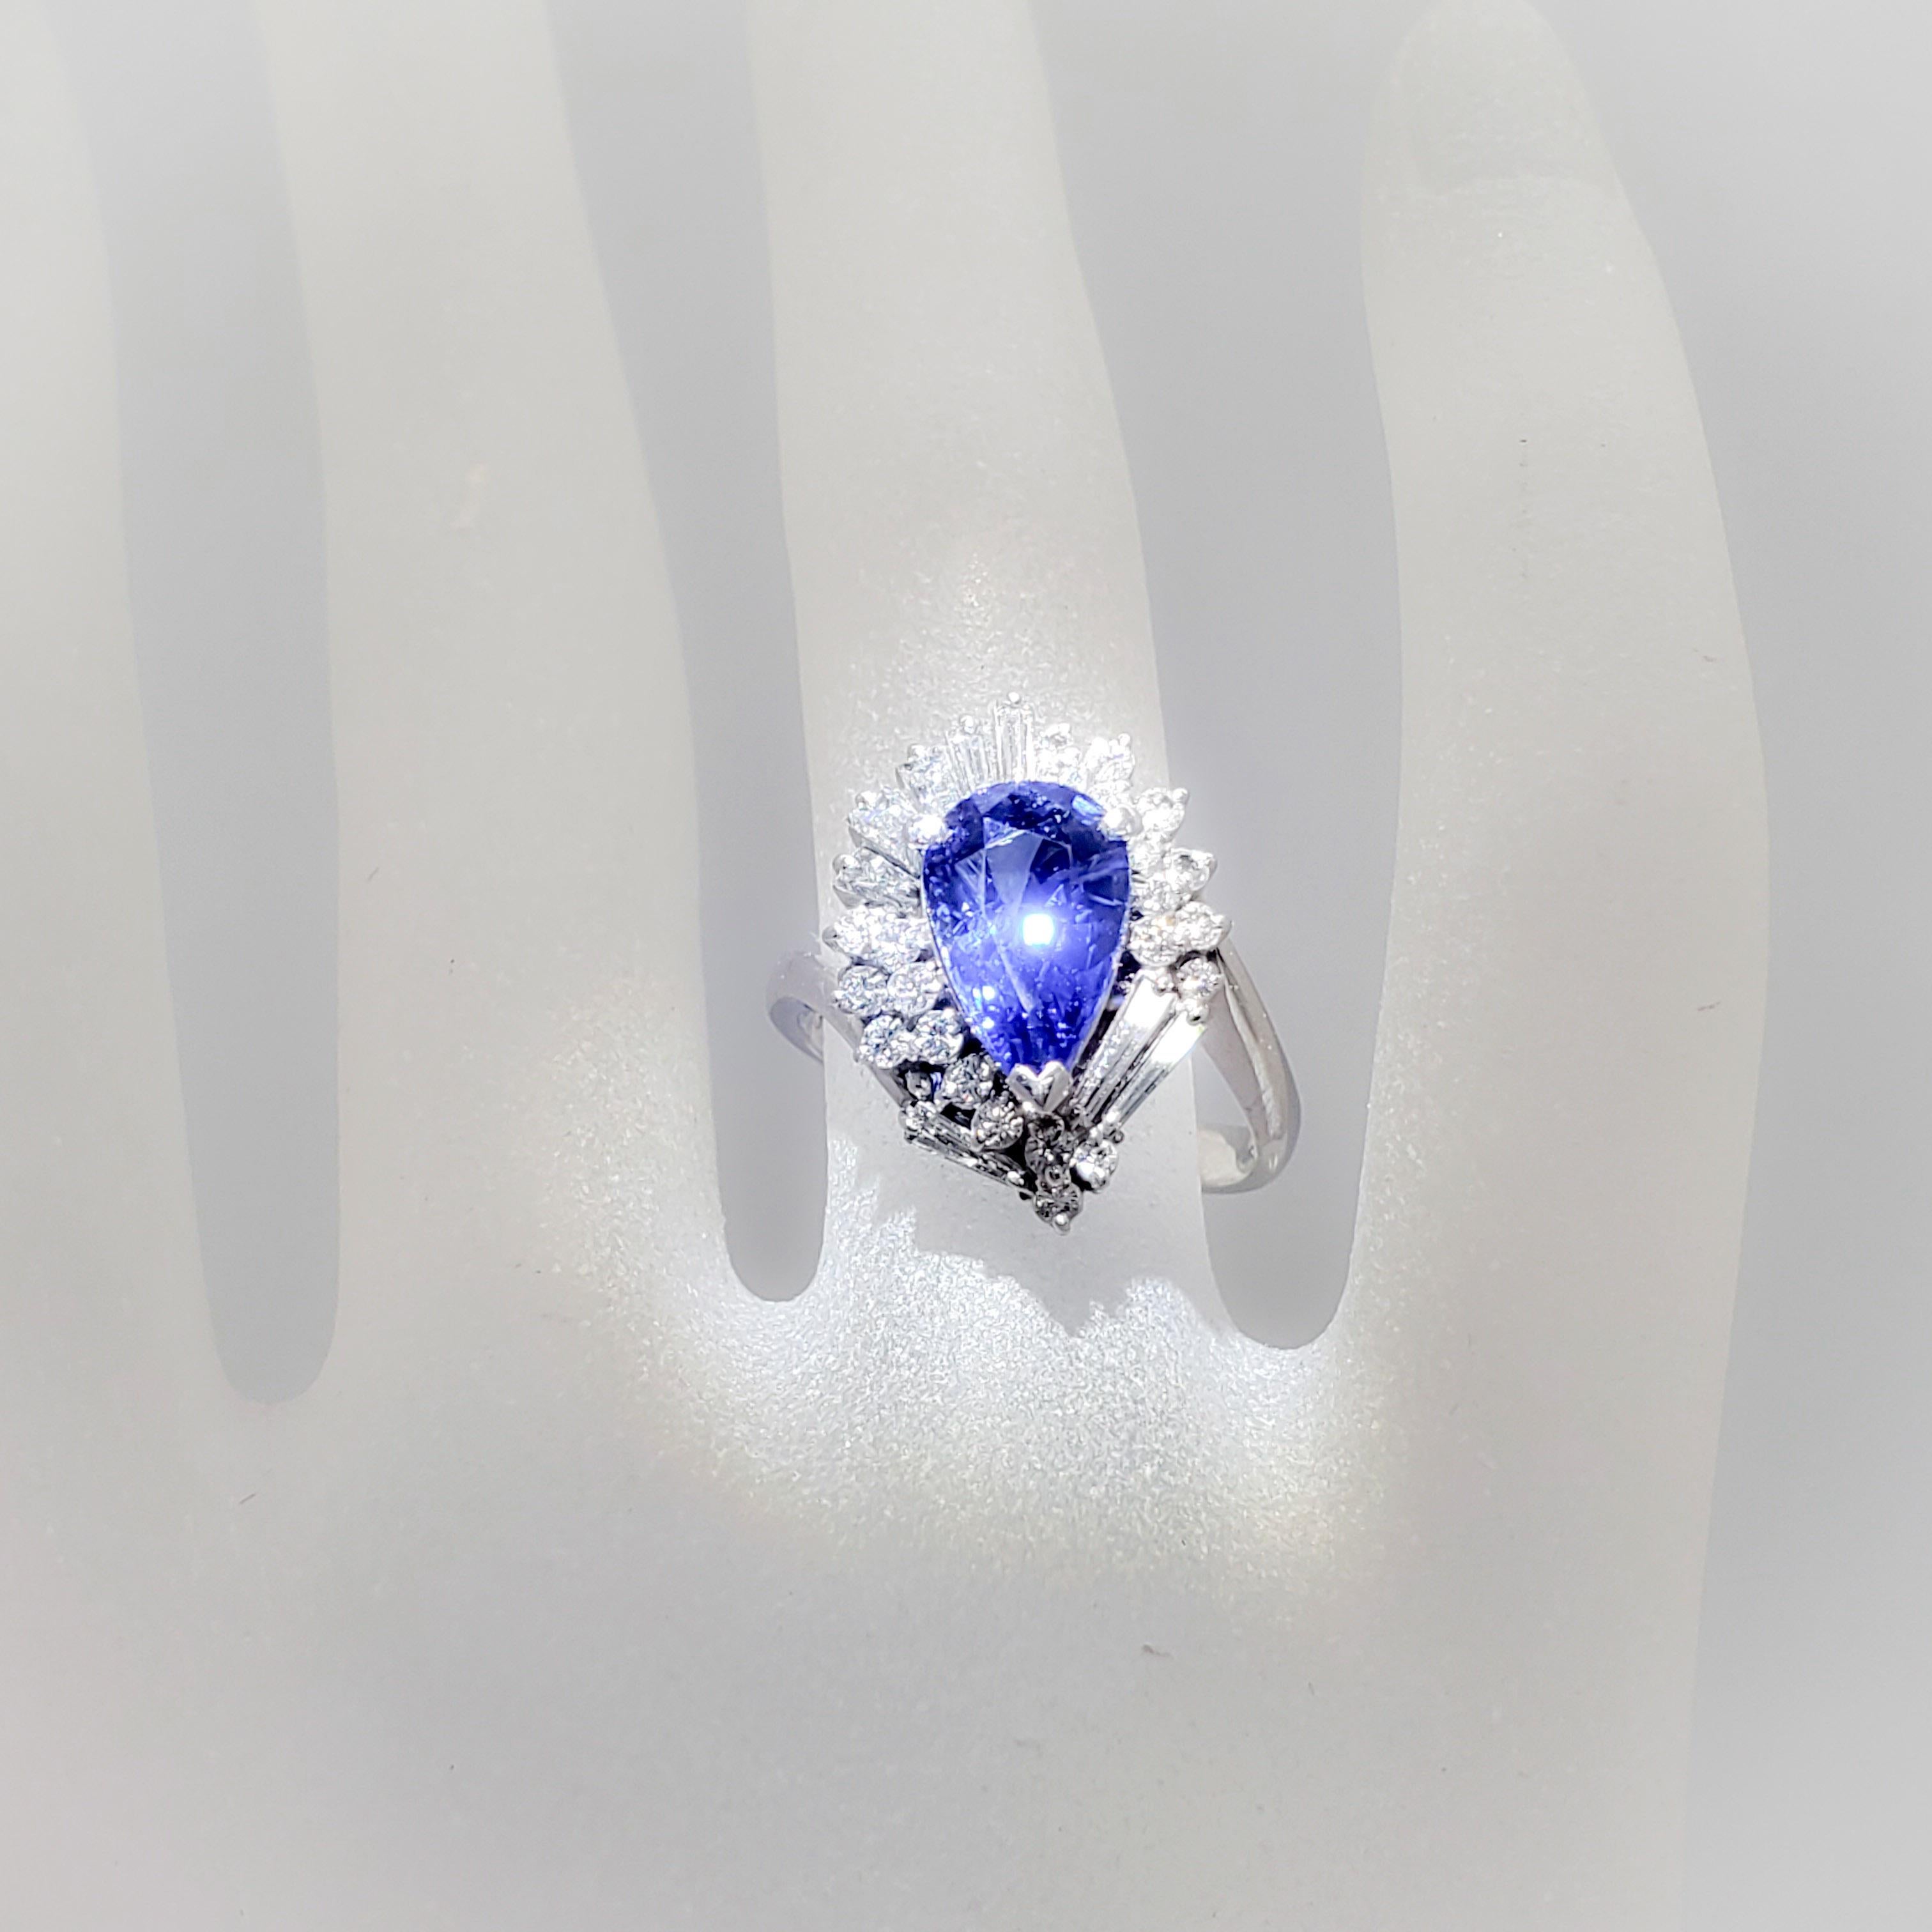 Gorgeous estate deep hue blue sapphire pear weighing 2.91 cts with 0.80 cts of good quality, white, and bright diamond baguettes and rounds.  Handmade in platinum with approximately 9.20 grams of metal.  Size 6.75.  Excellent condition.